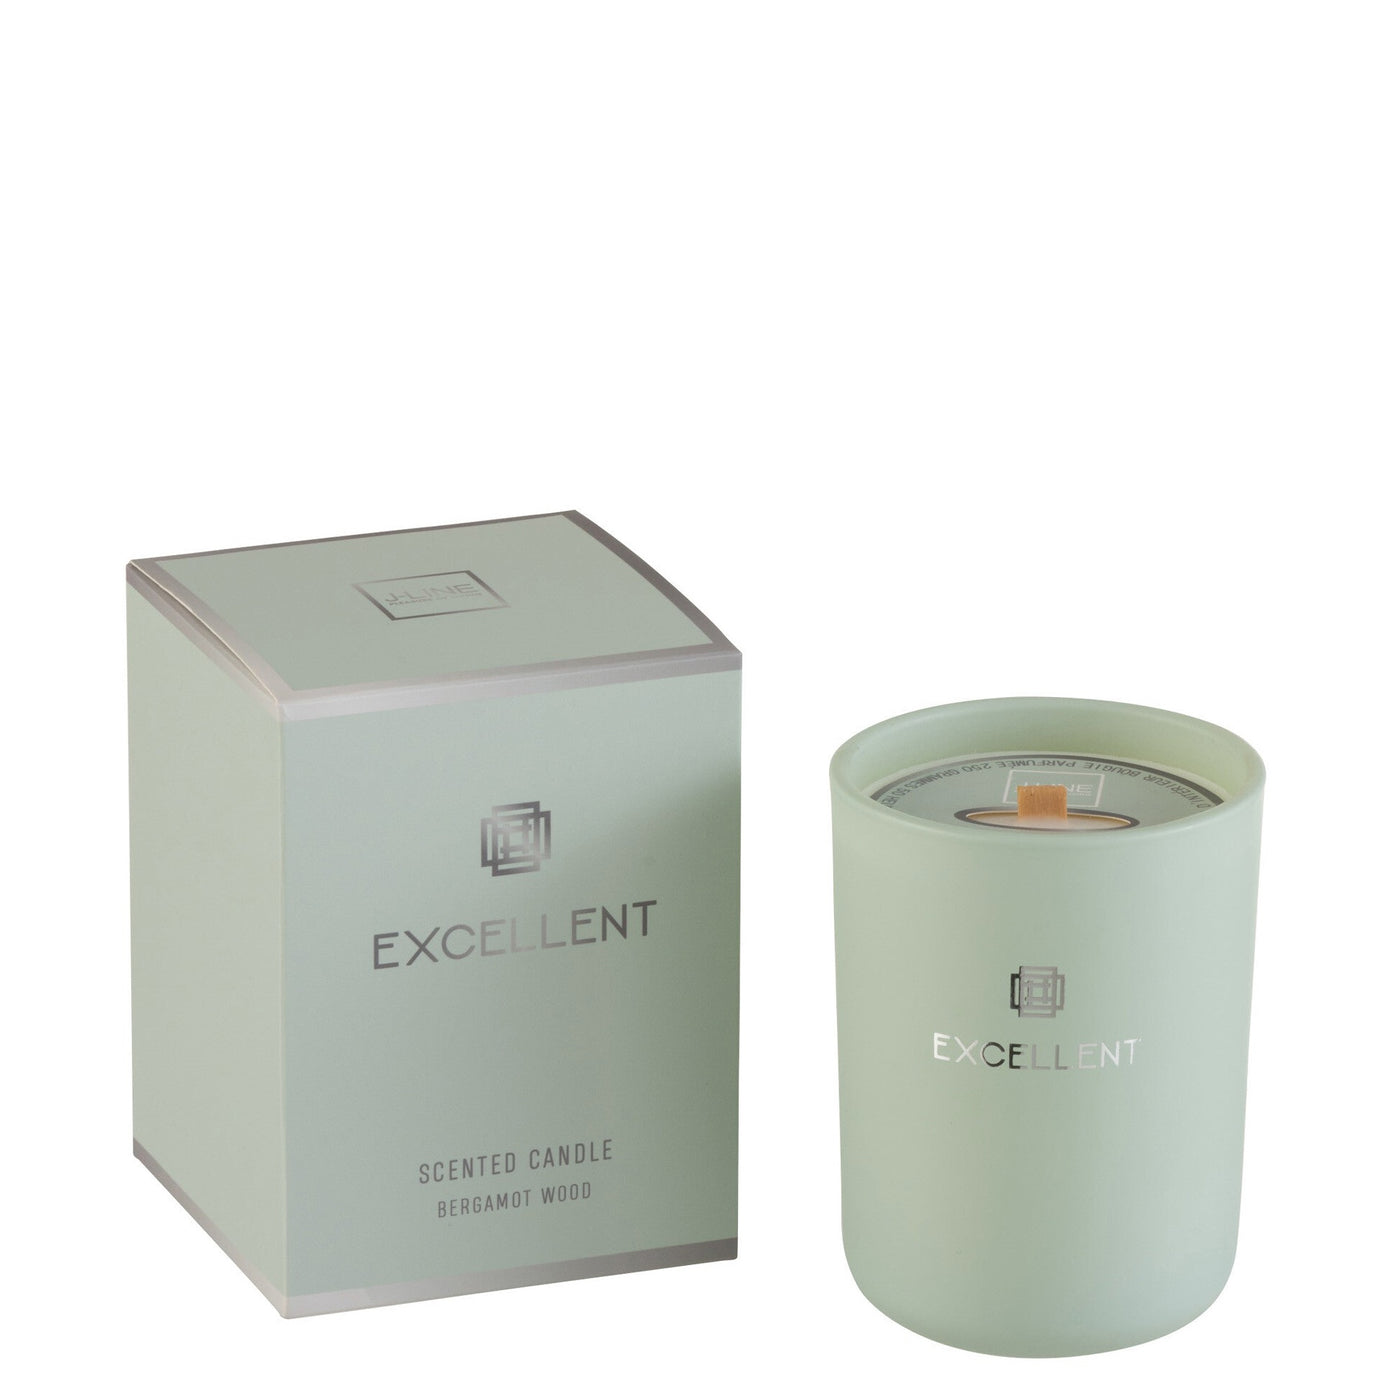 SCENTED CANDLE EXCELLENT GLASS MINT GREEN SMALL-50U